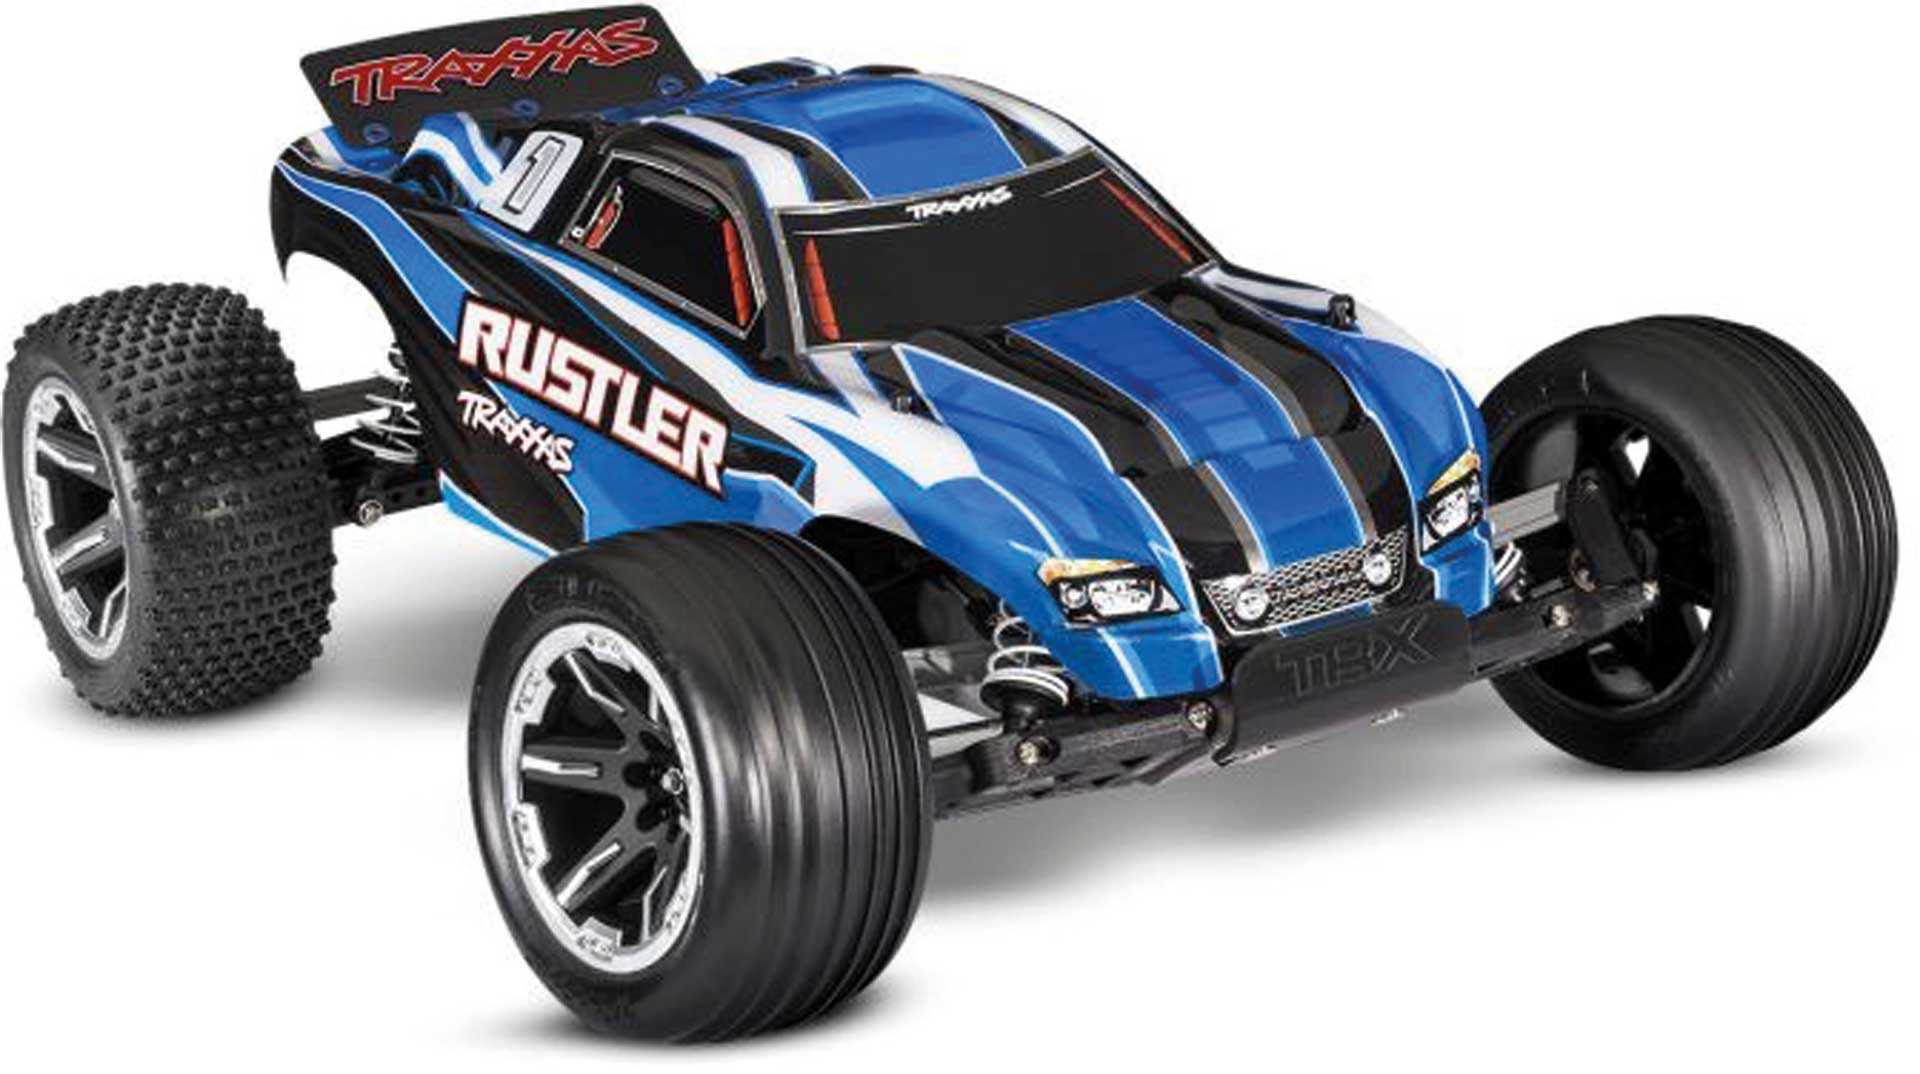 TRAXXAS RUSTLER BLUE 1/10 2WD STADIUM-TRUCK RTR BRUSHED, WITH BATTERY AND 4AMP USB-C CHARGER